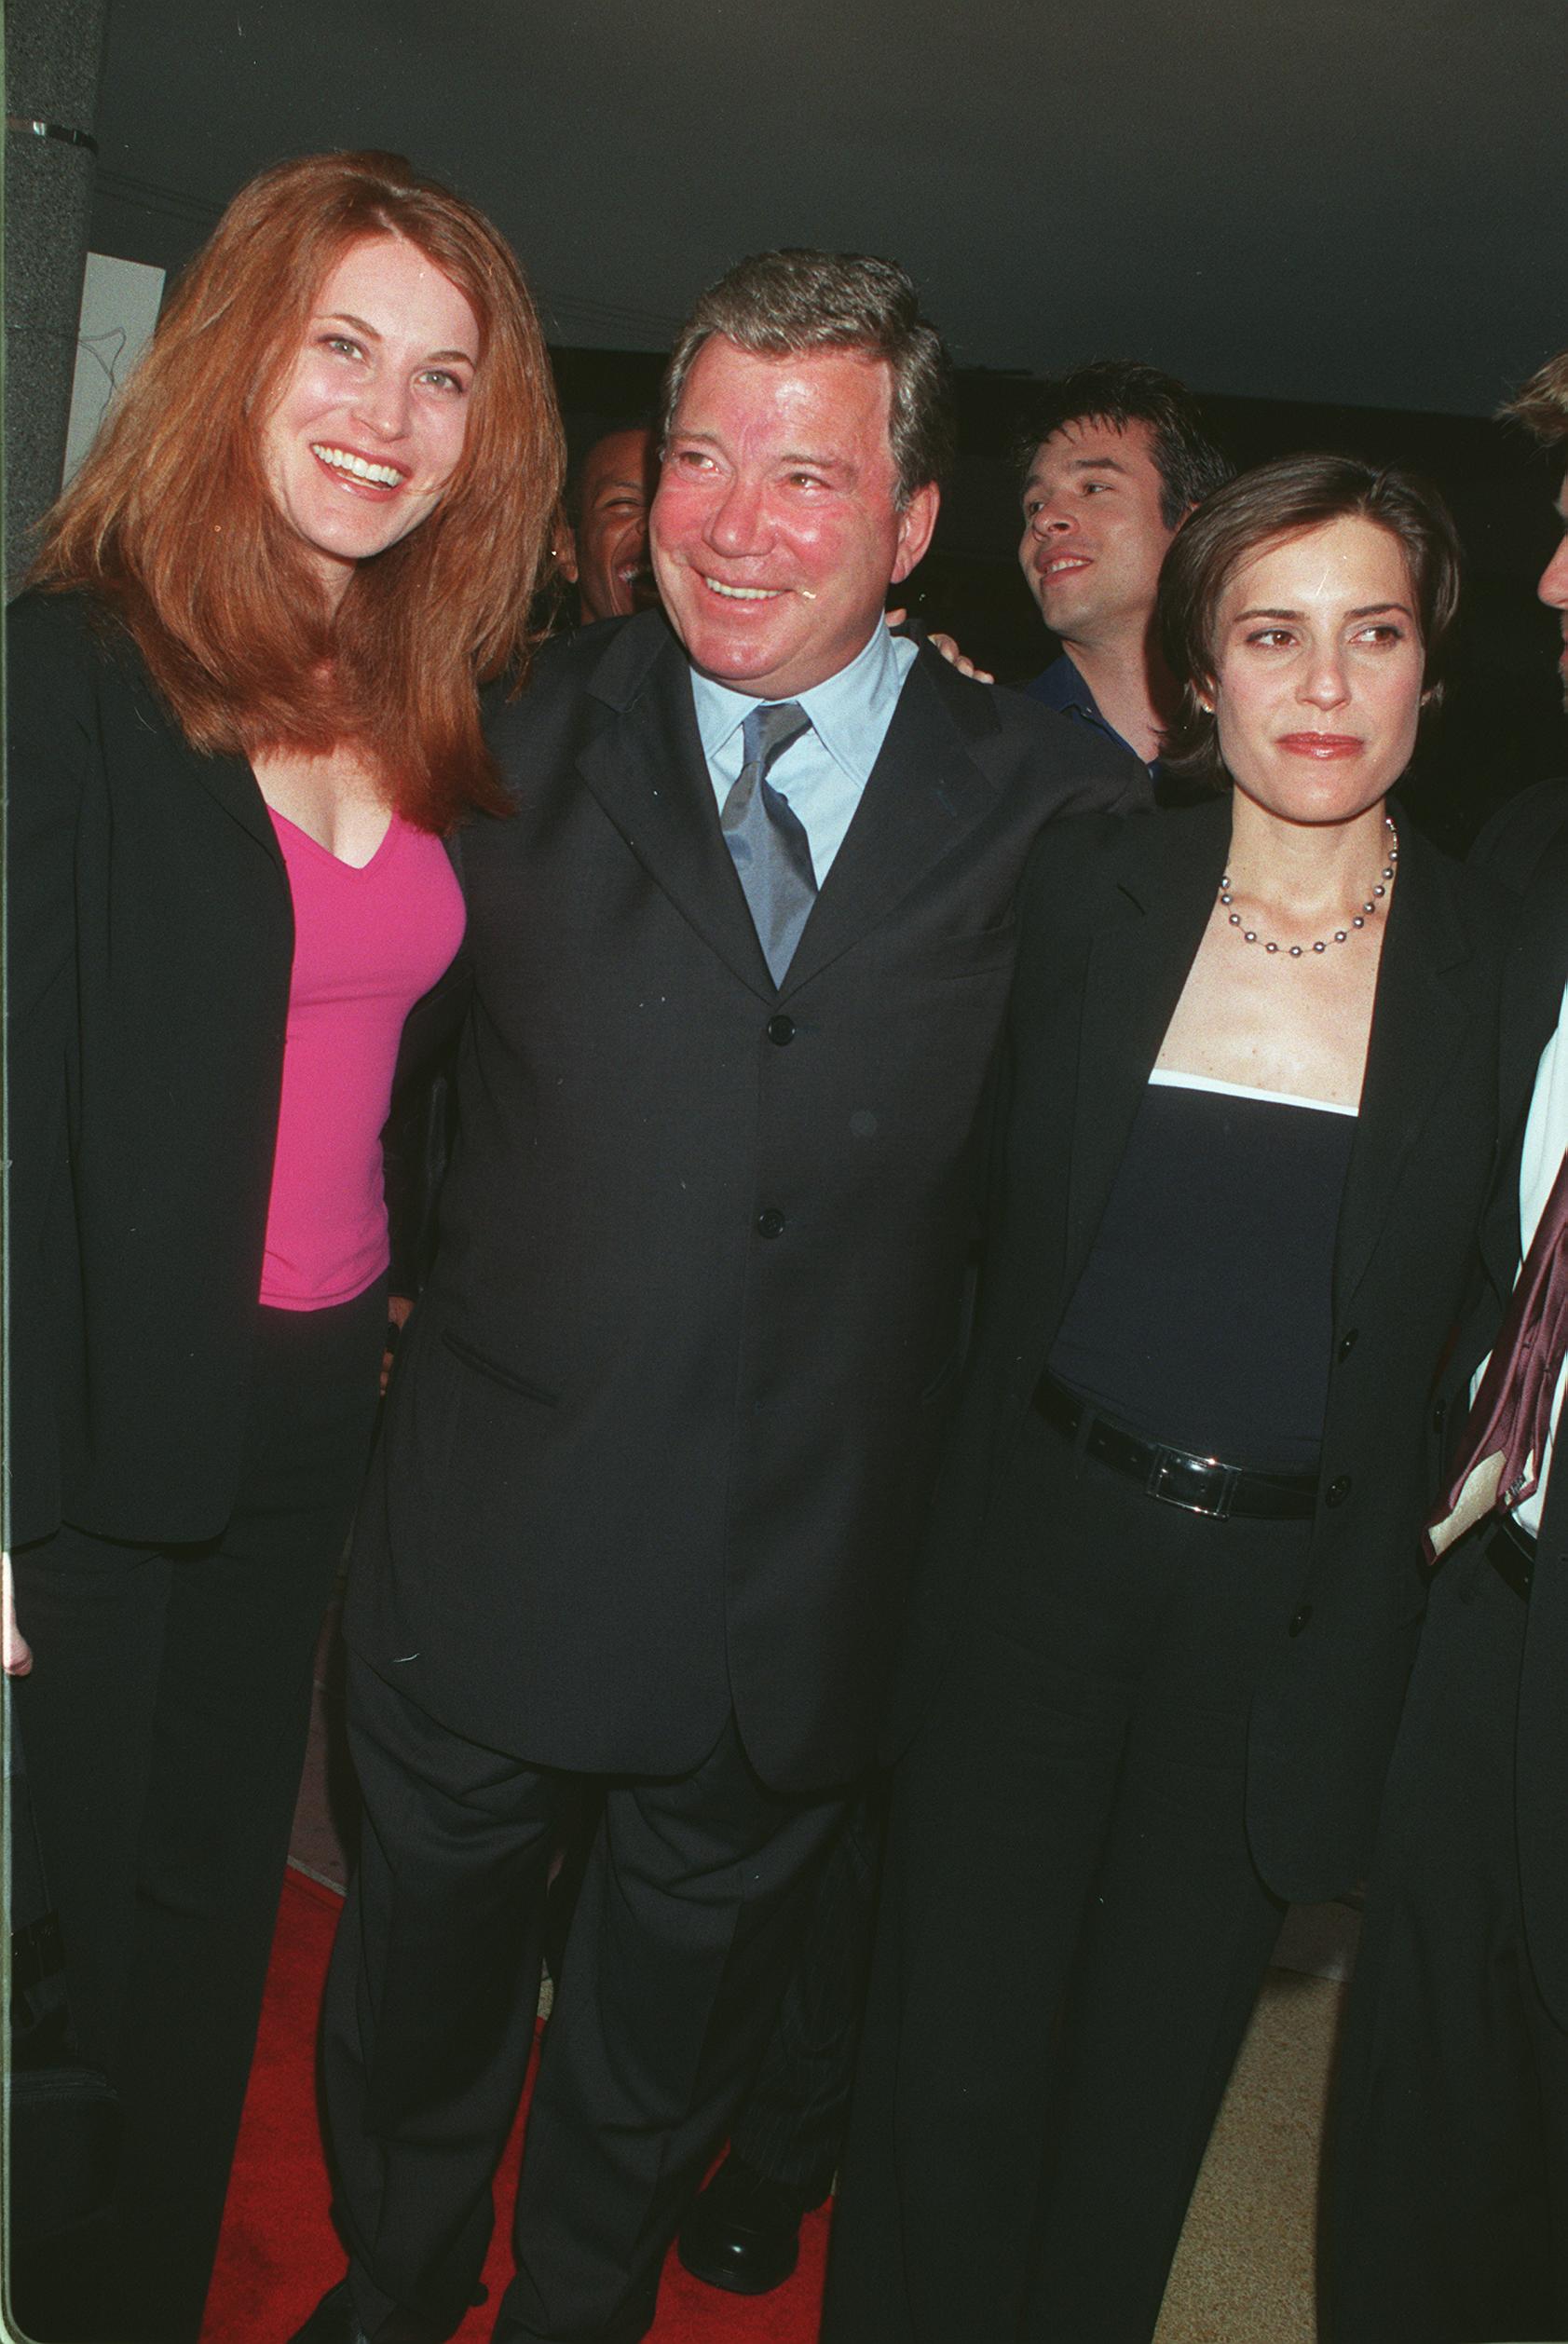 William Shatner and daughters at the premiere of "Free Enterprise" on June 2, 1999. | Source: Getty Images